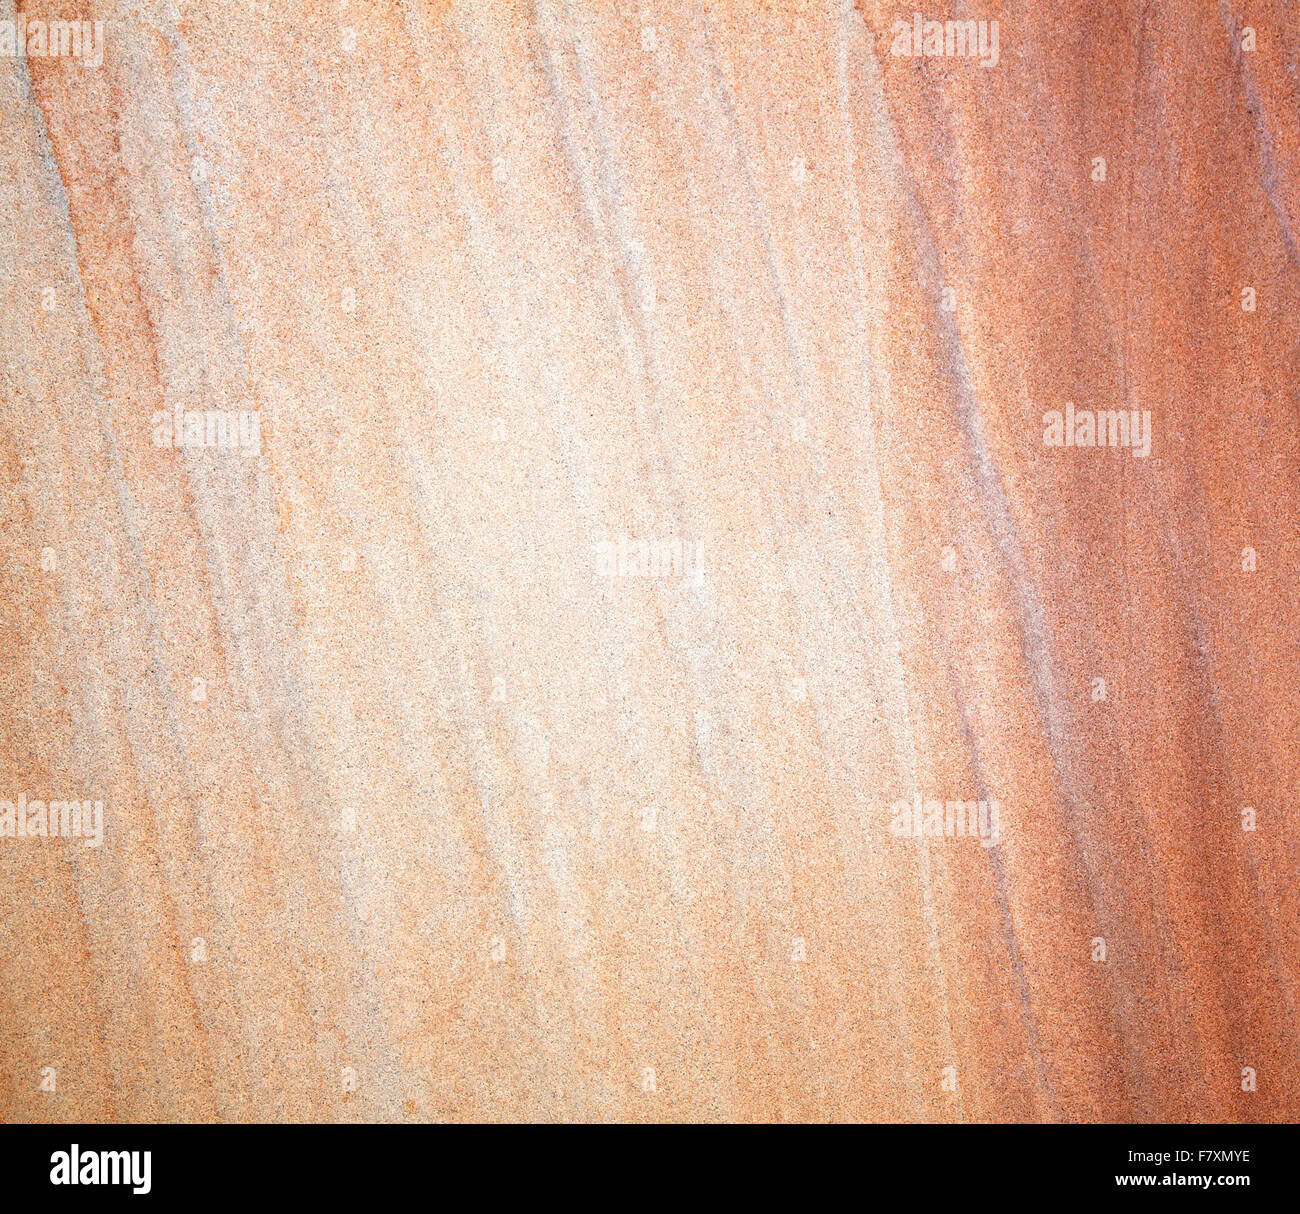 surface of the marble with brown tint Stock Photo